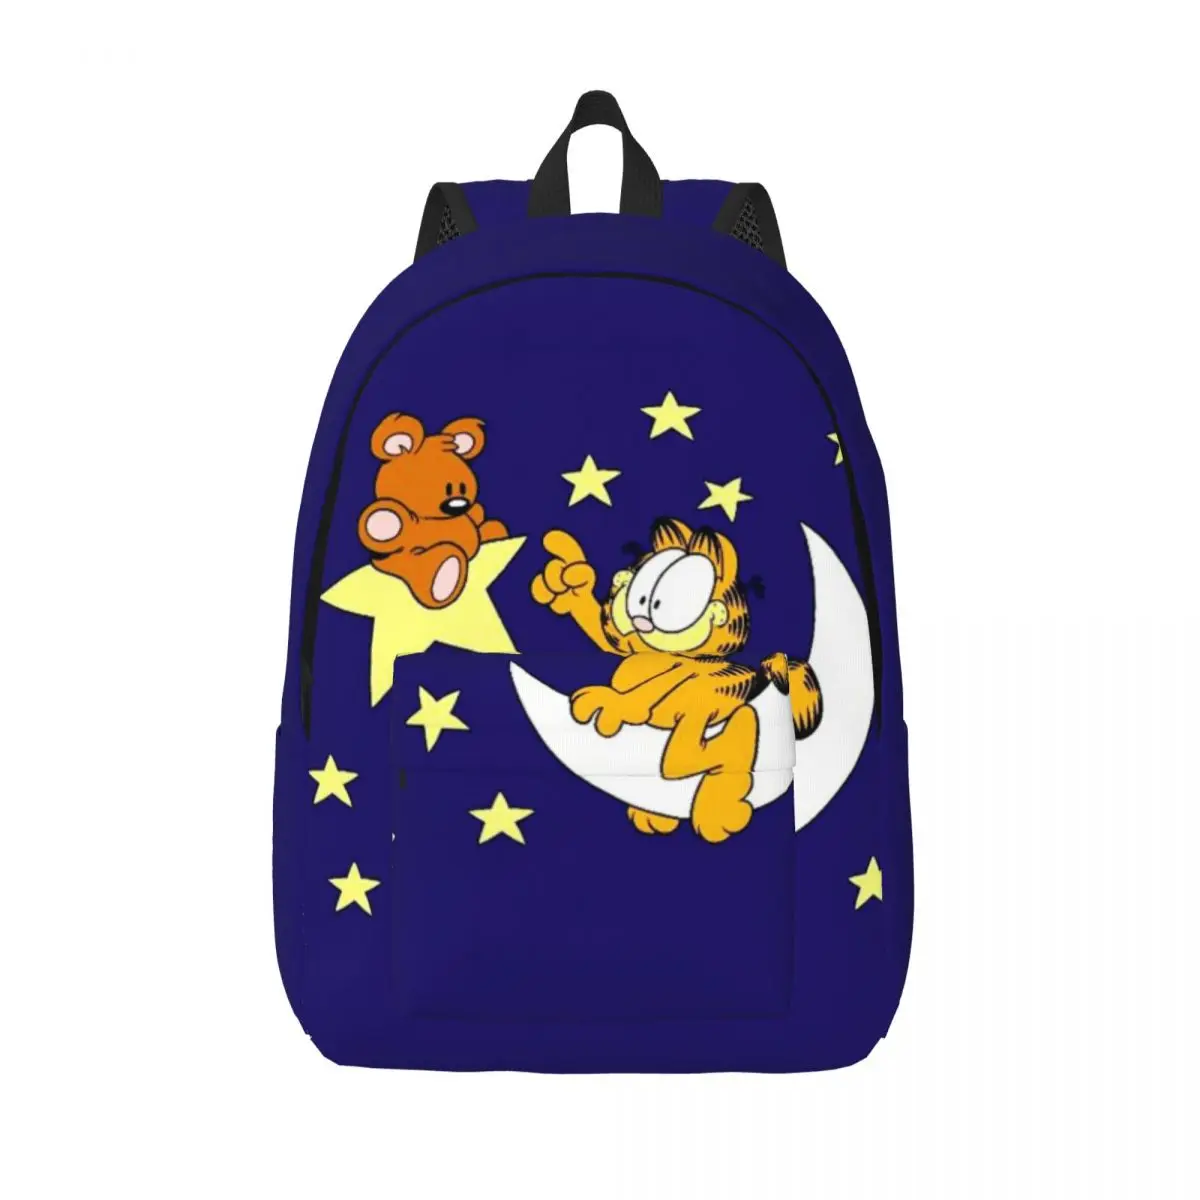 Garfields And Bear In Space Laptop Backpack Men Women Basic Bookbag for School College Students Cartoon